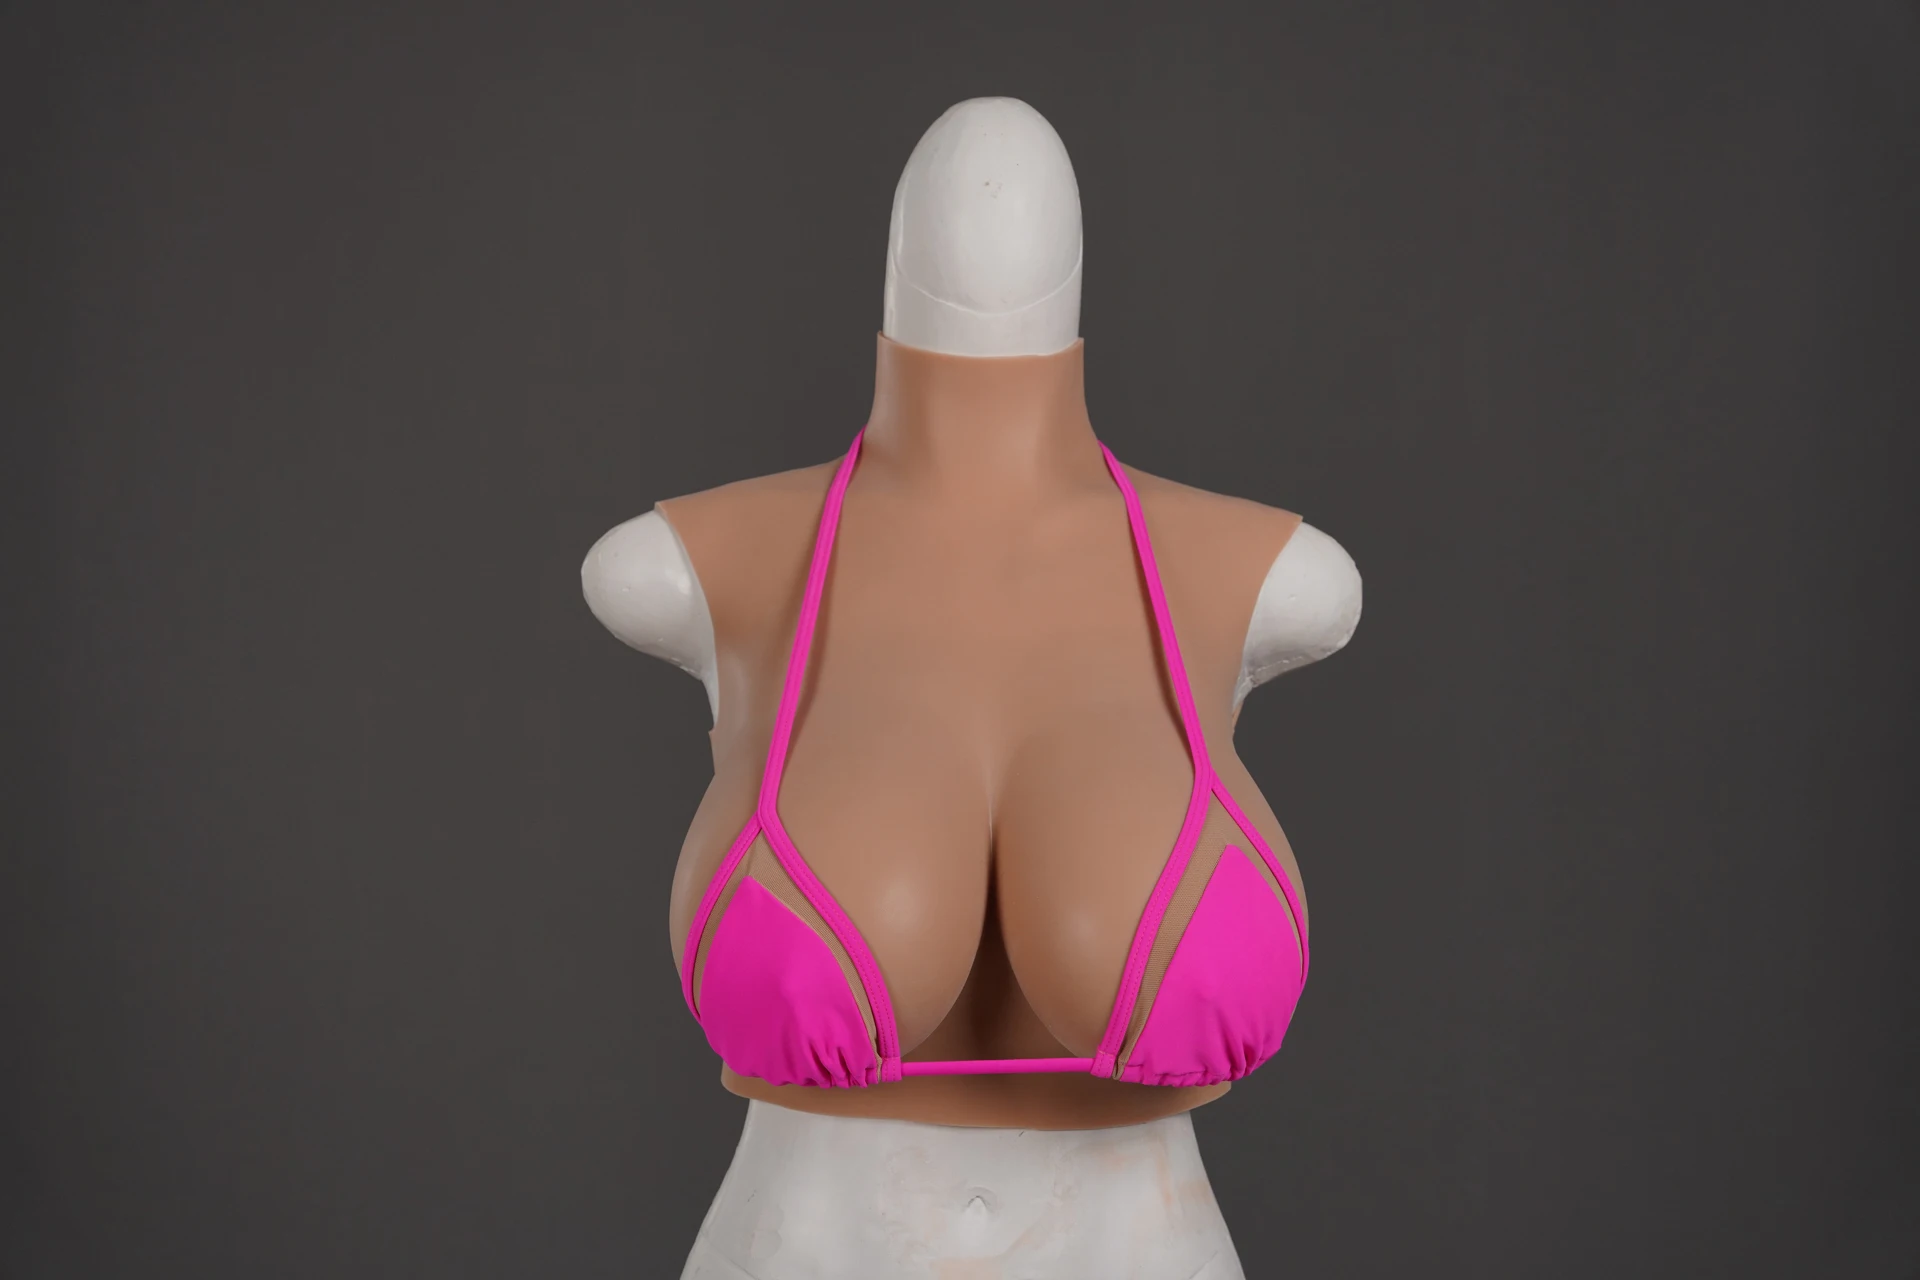 new-upgrade-abcdeg-high-collar-fake-artificial-boob-realistic-silicone-breast-forms-crossdresser-shemale-transgender-drag-queen